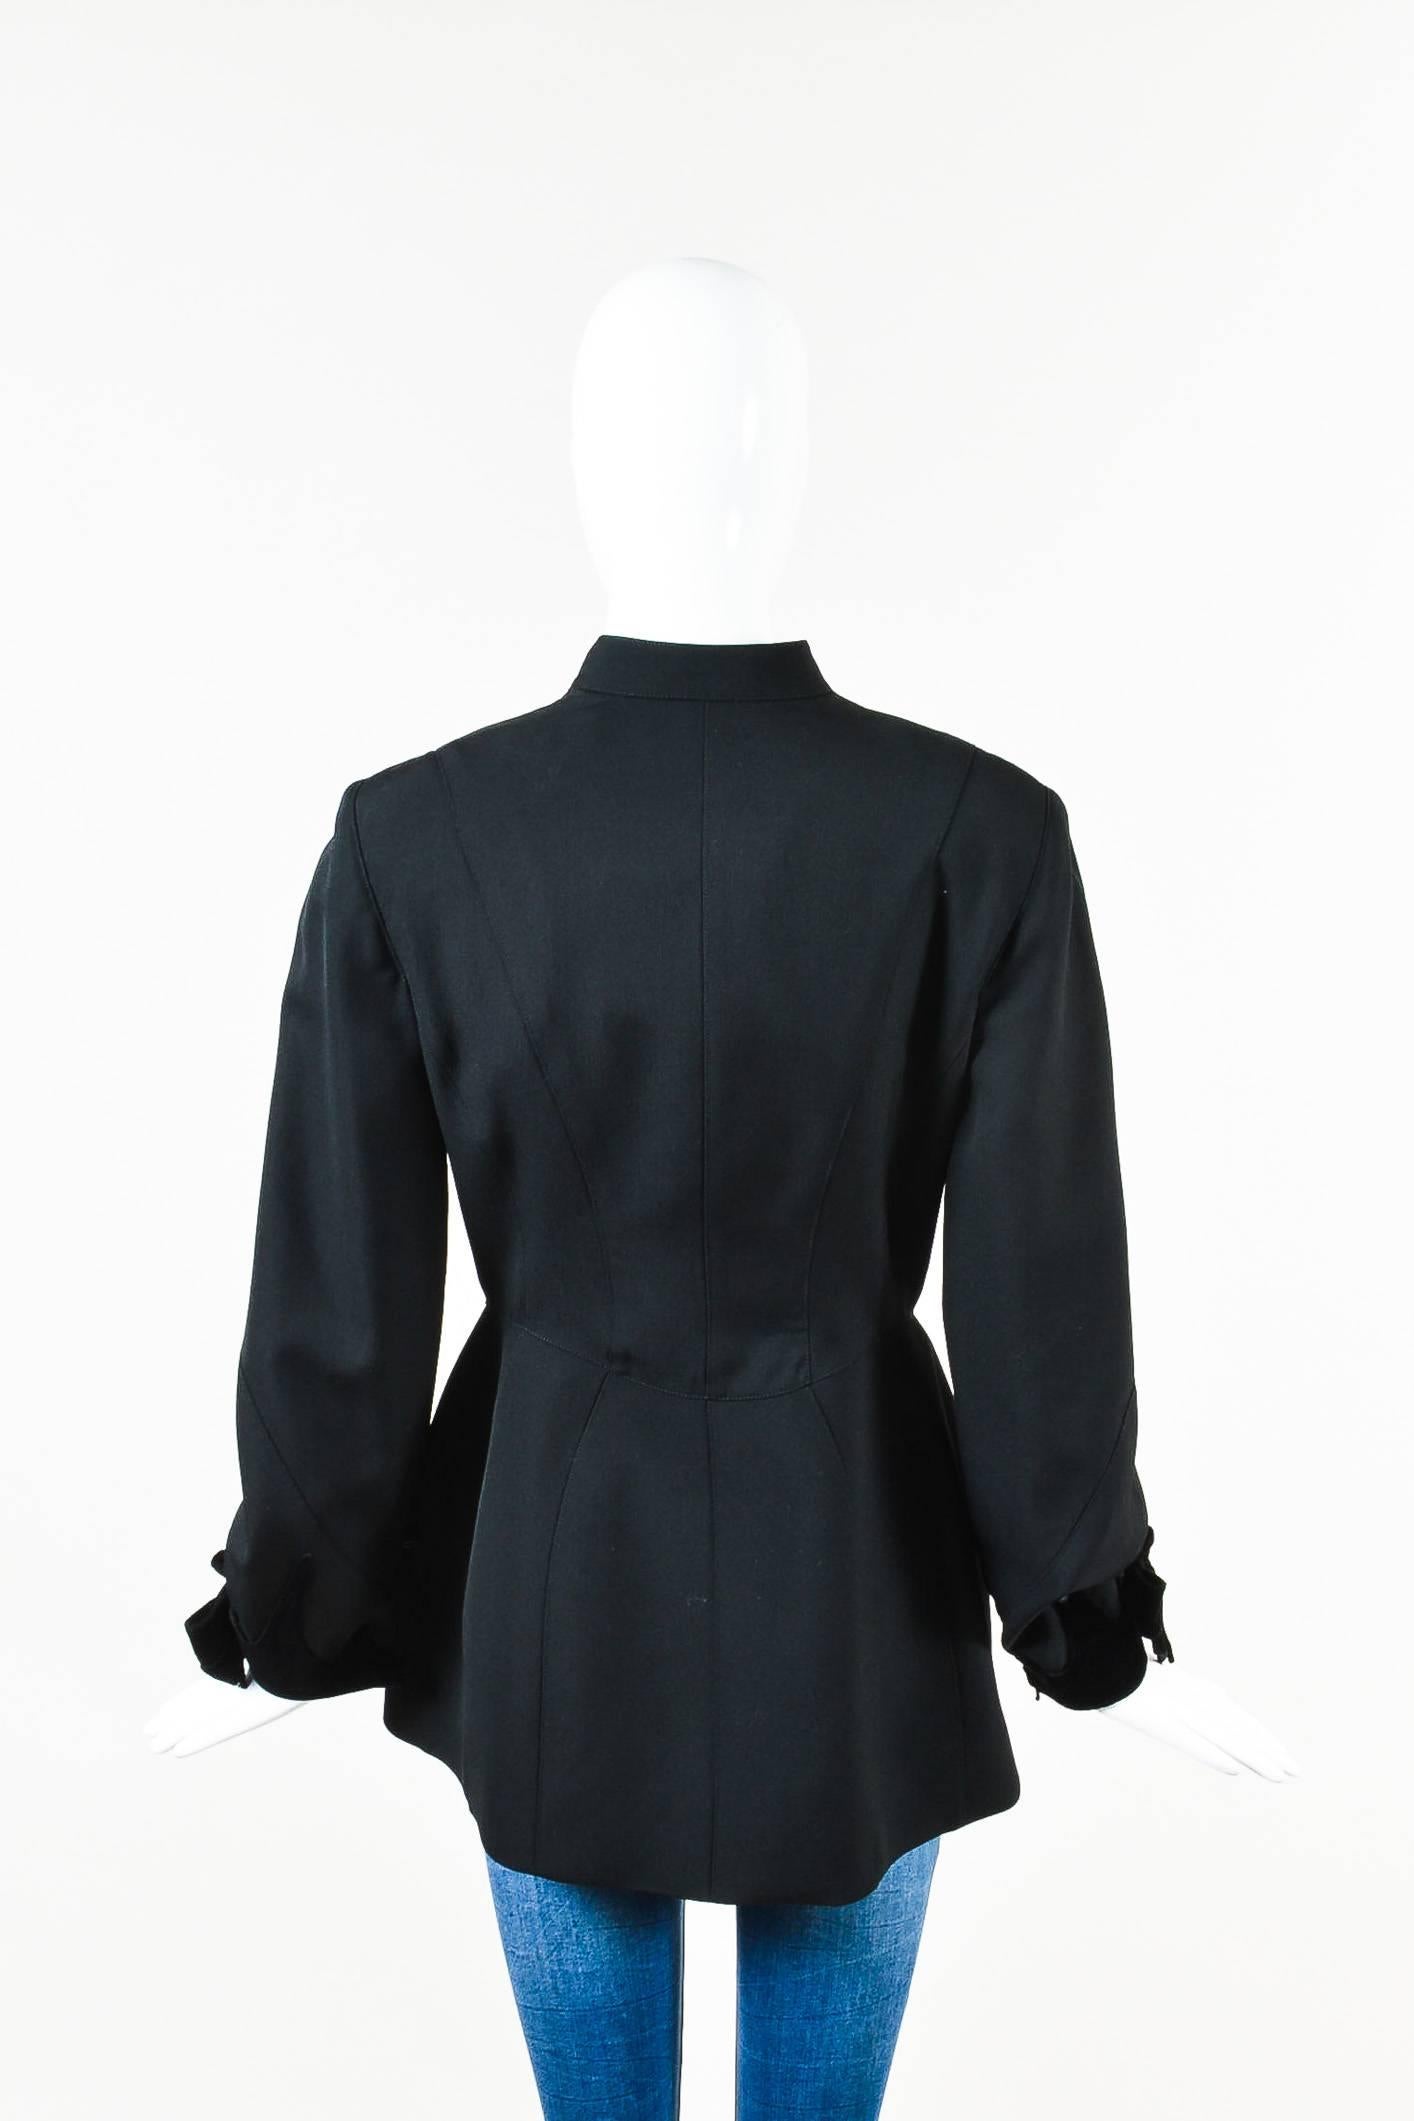 Vintage Thierry Mugler black wool crepe jacket featuring velvet accents at center front and sleeve openings. Snap front closure. Lined.